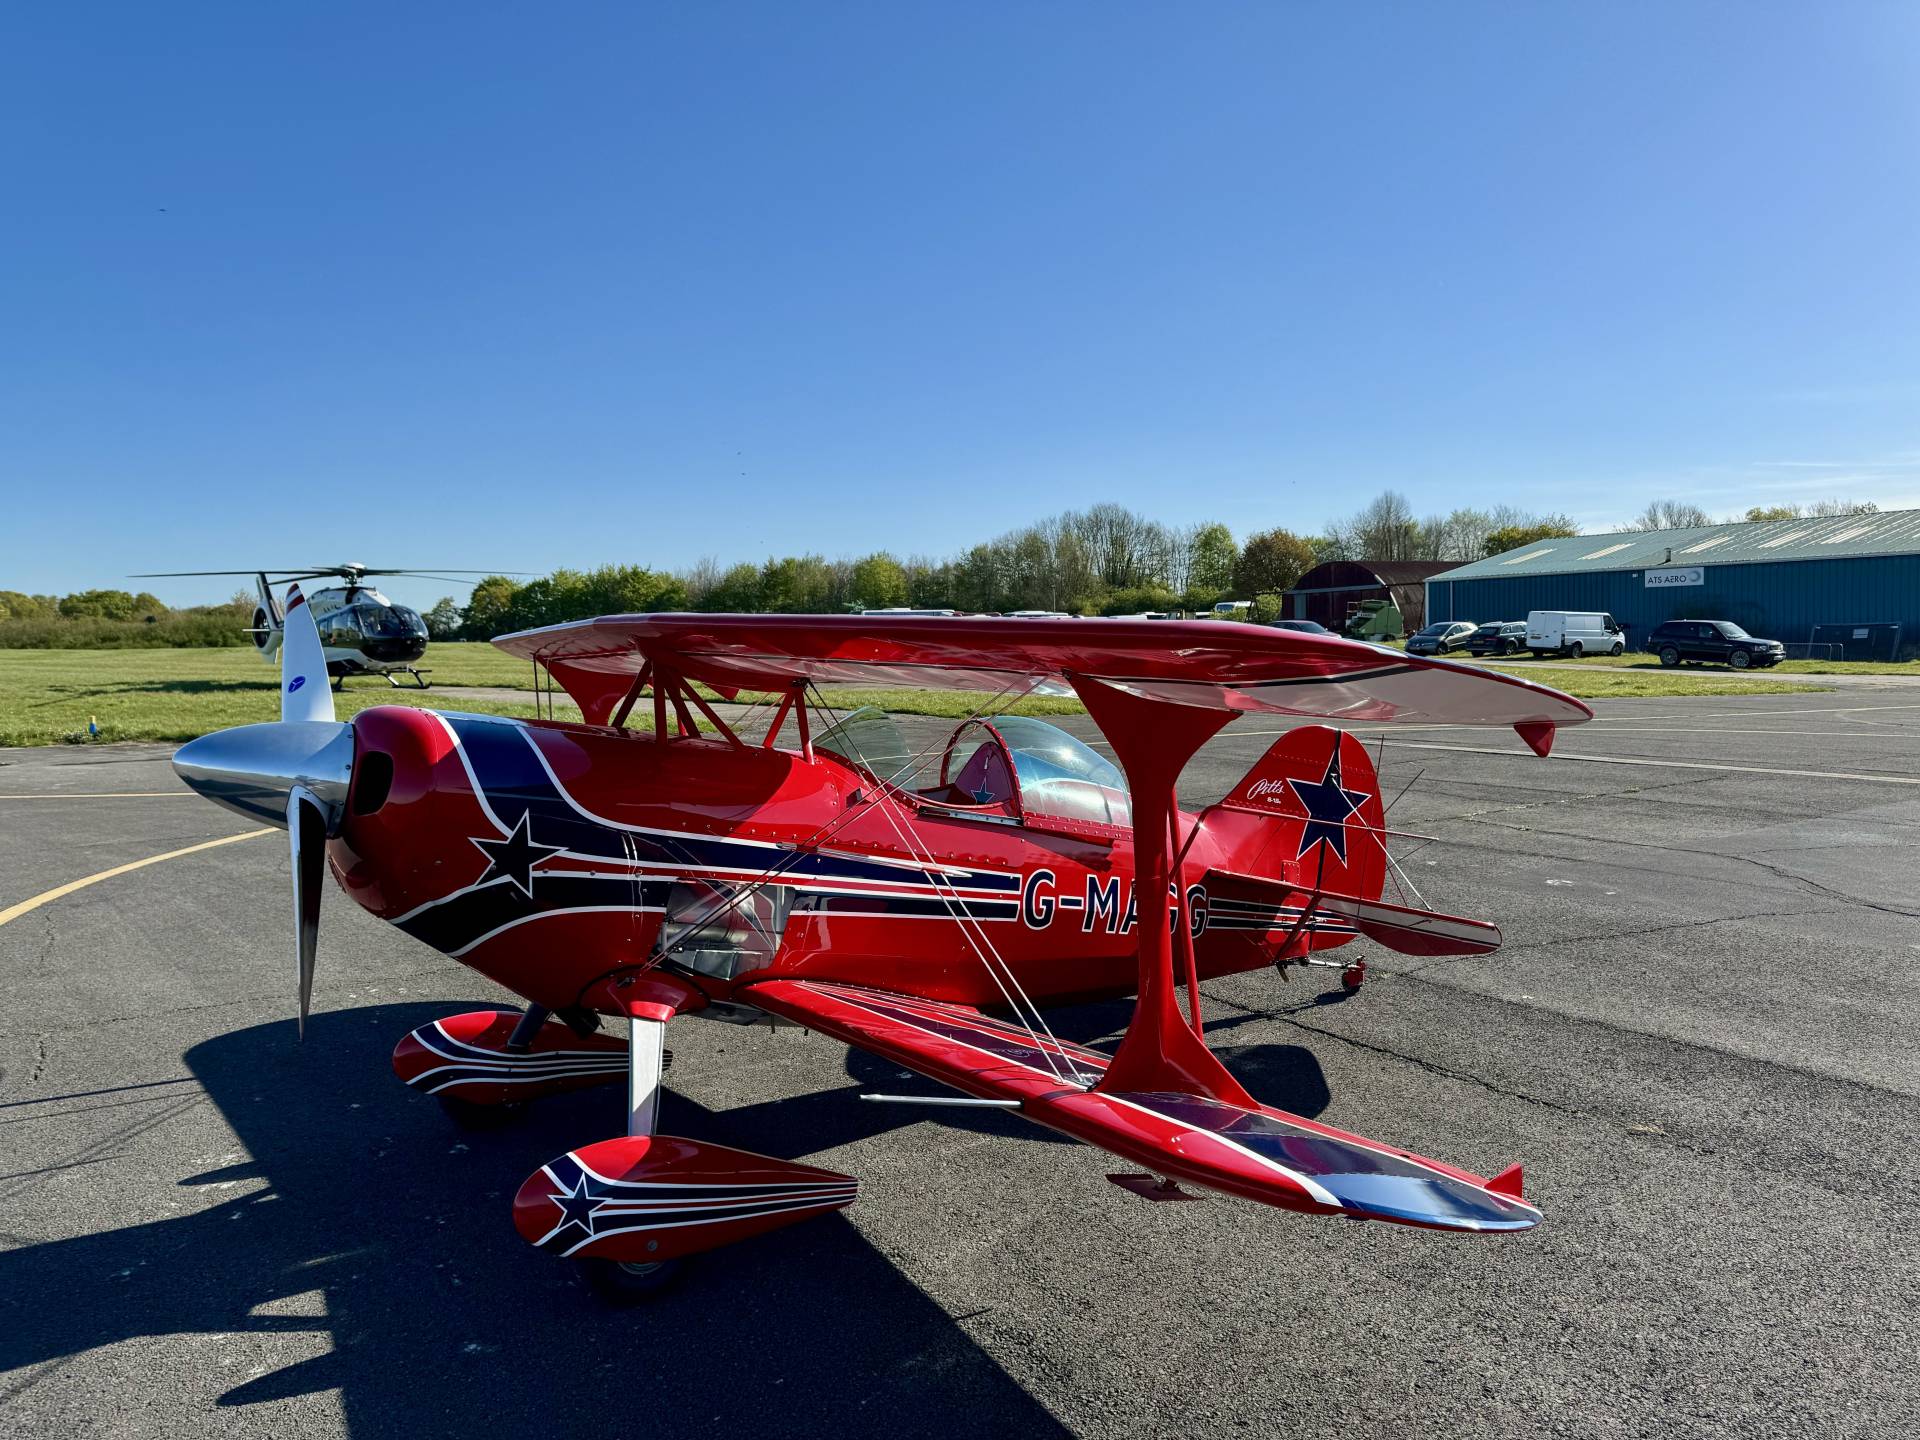 Pitts S-1 S